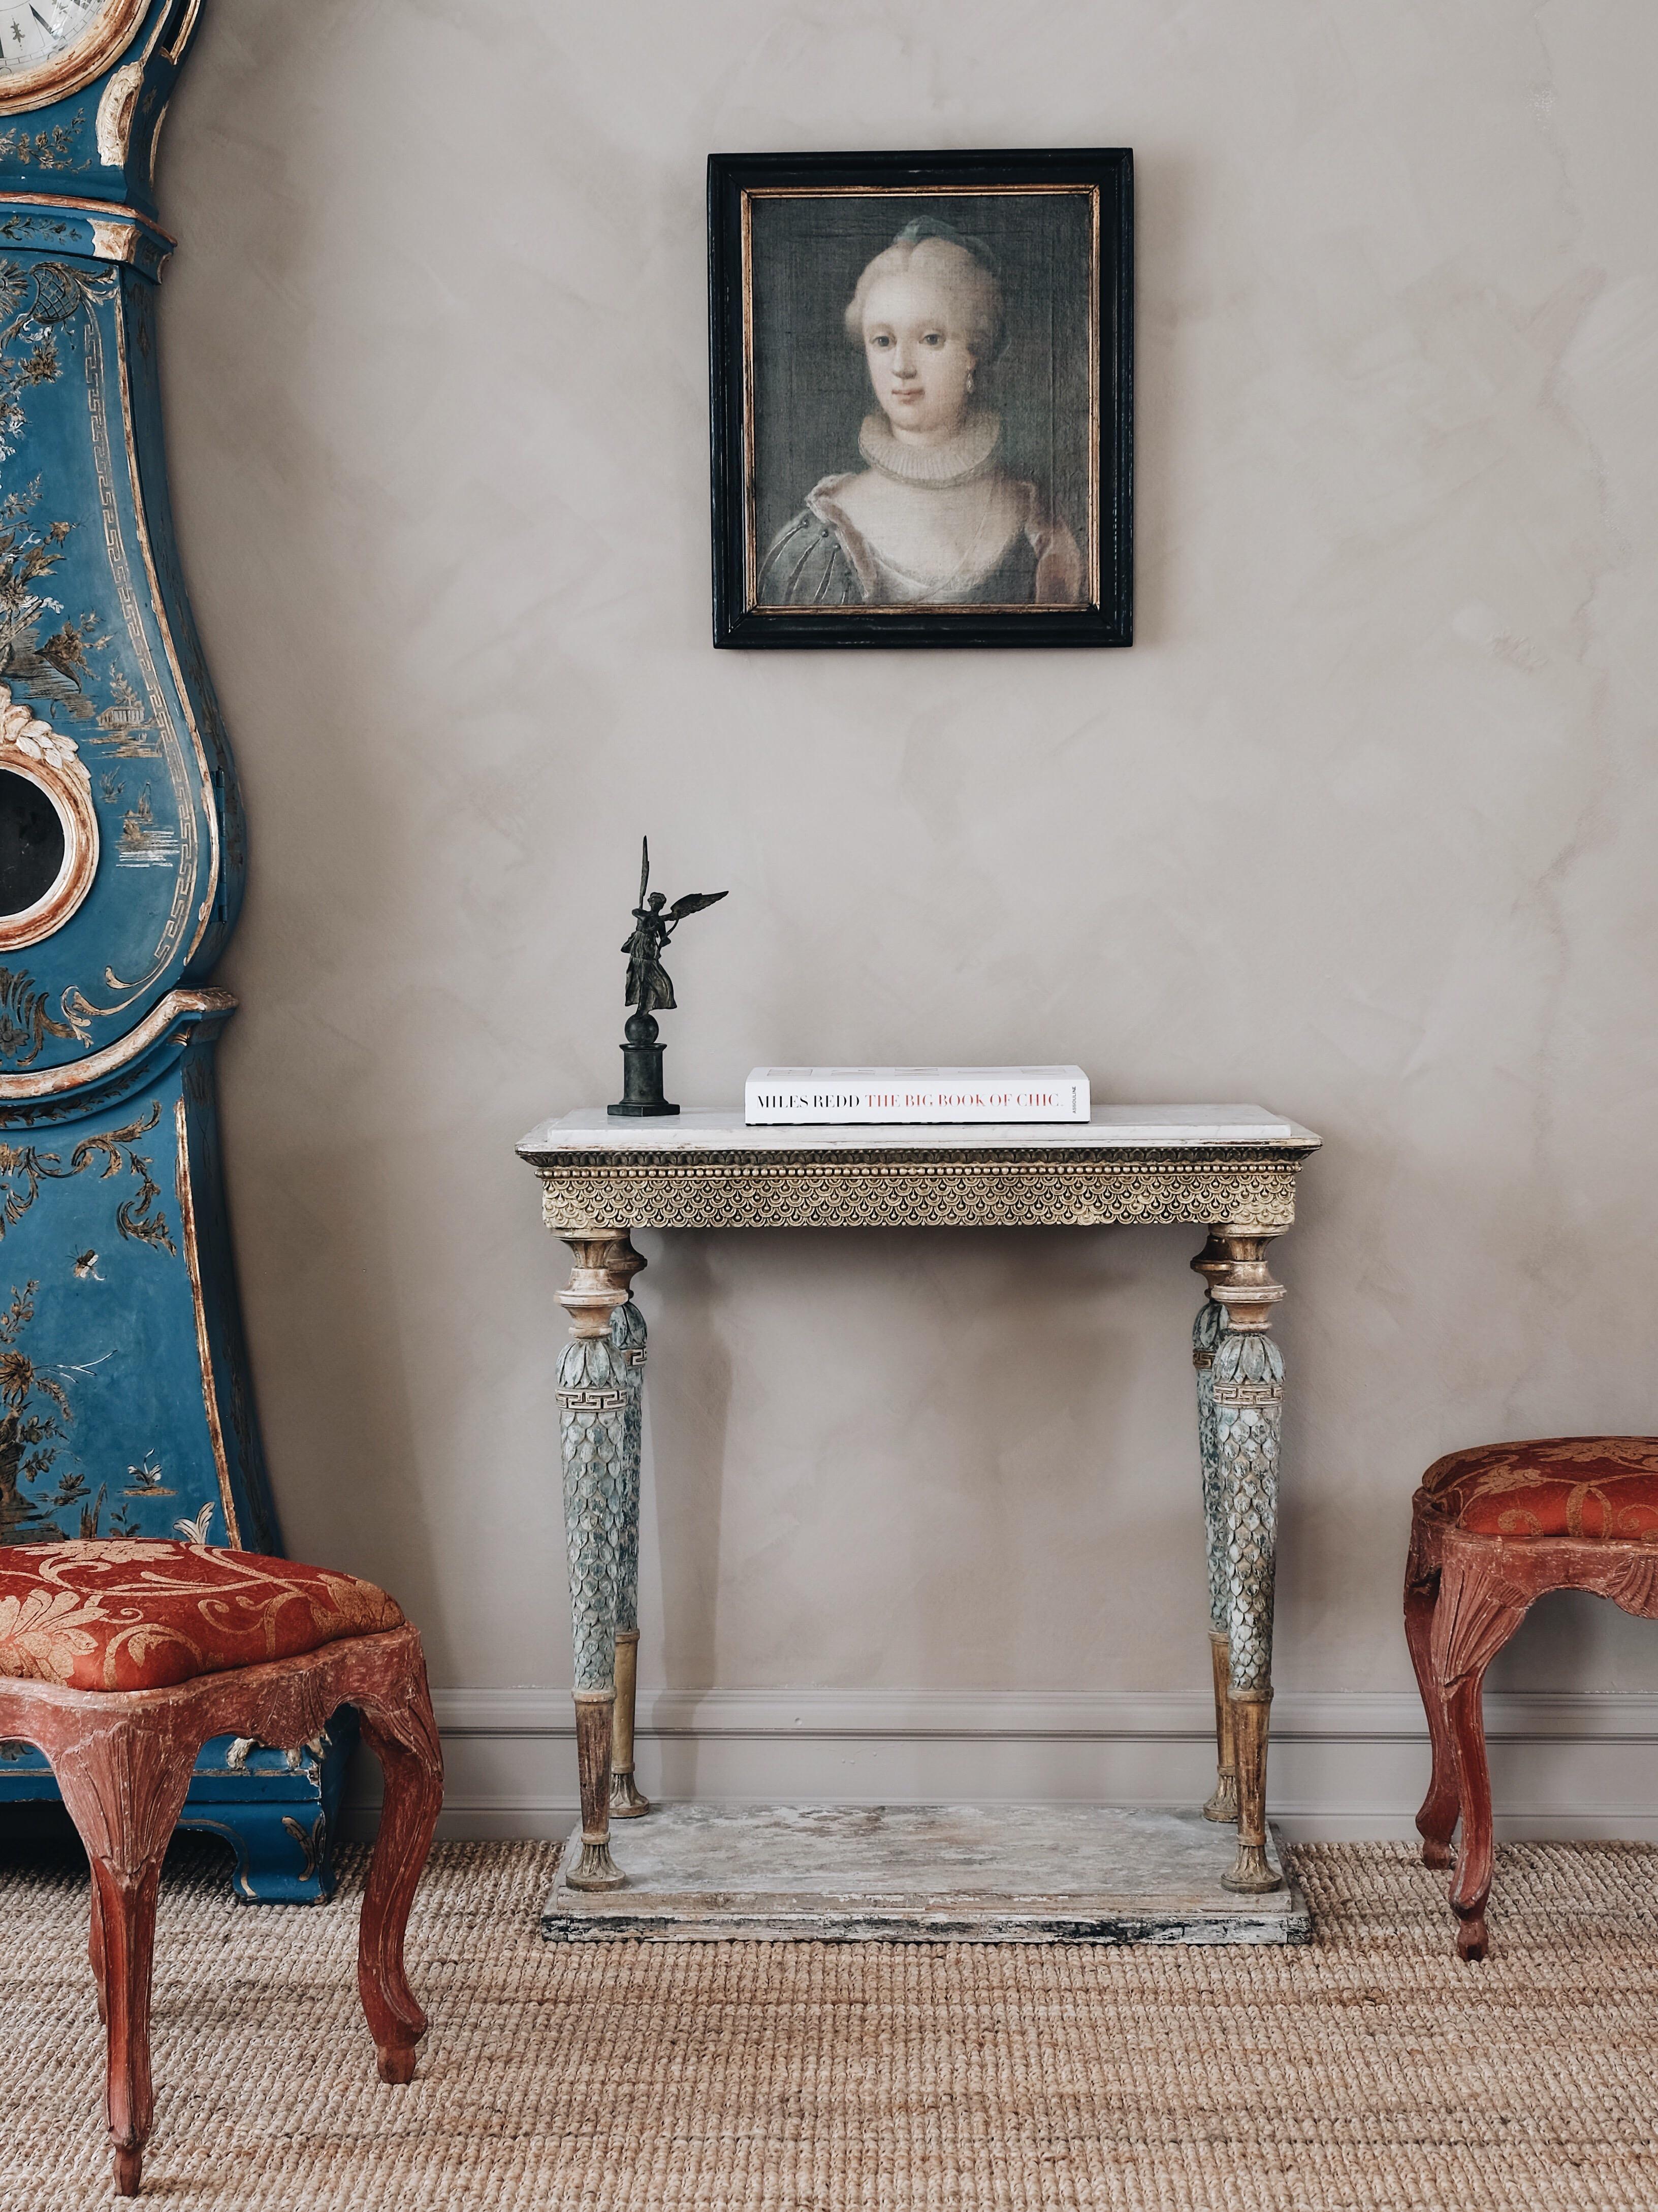 Fine early 19th century Gustavian console table in original color with Carrara marble top, circa 1800, Sweden.